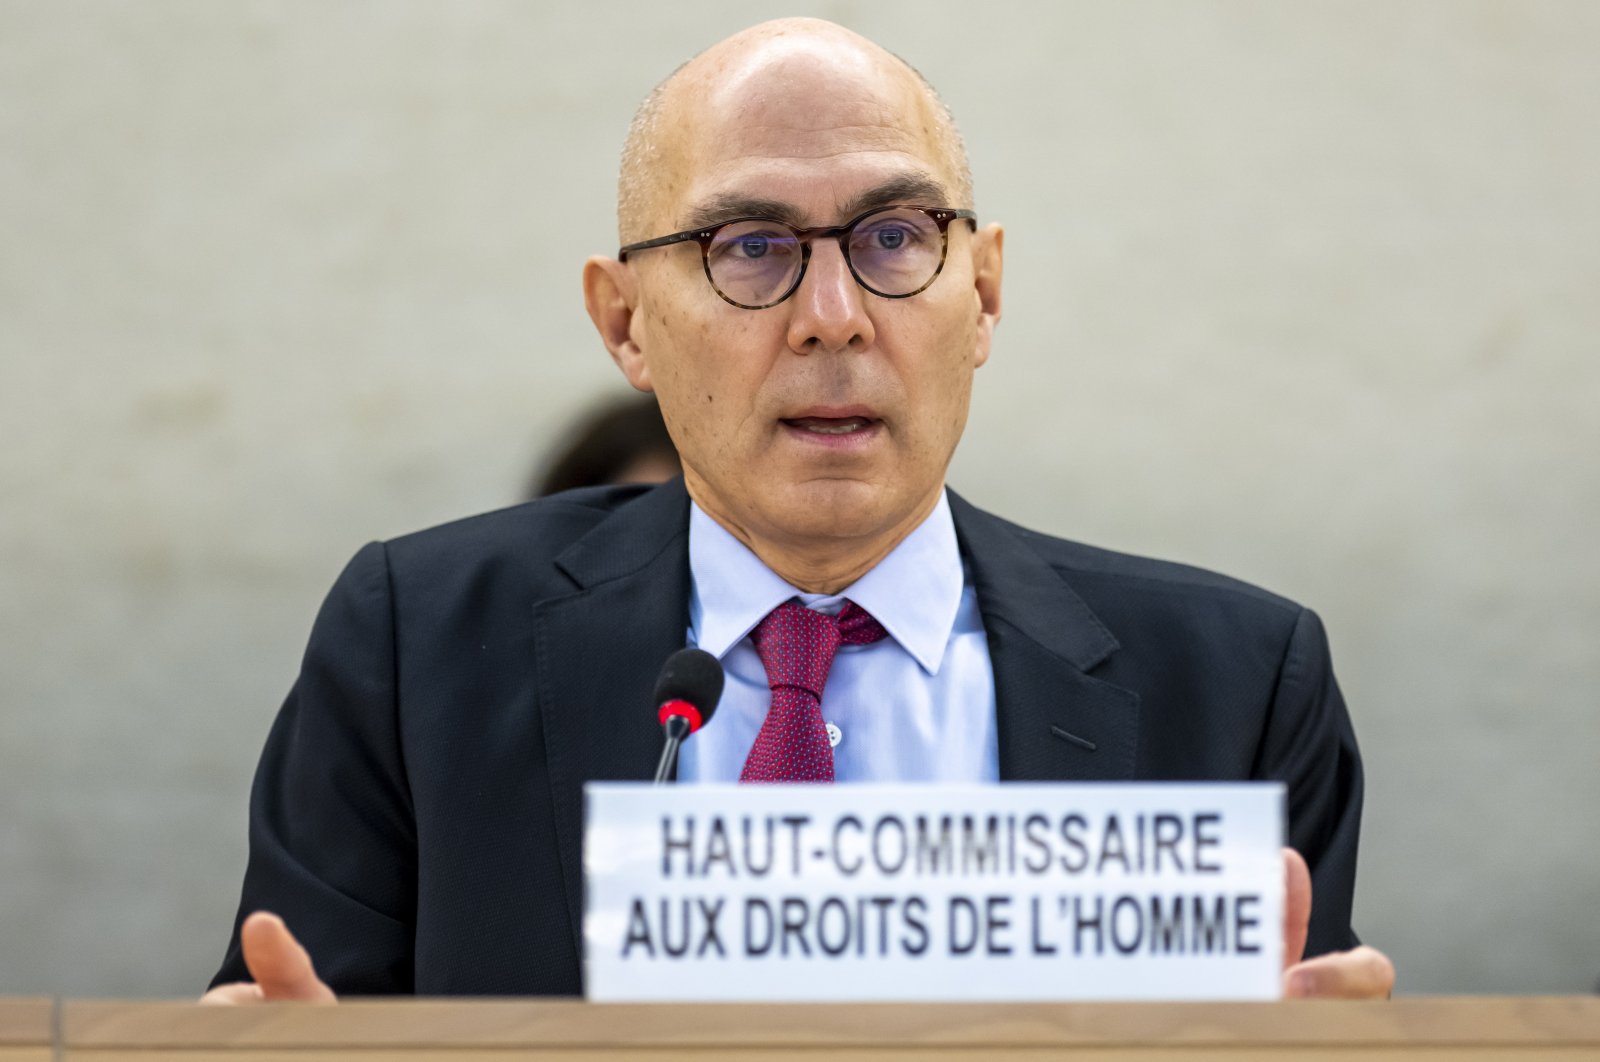 U.N. human rights chief Volker Türk speaks during a special session on the rights situation in Iran, Geneva, Switzerland, Nov. 24, 2022. (EPA Photo)